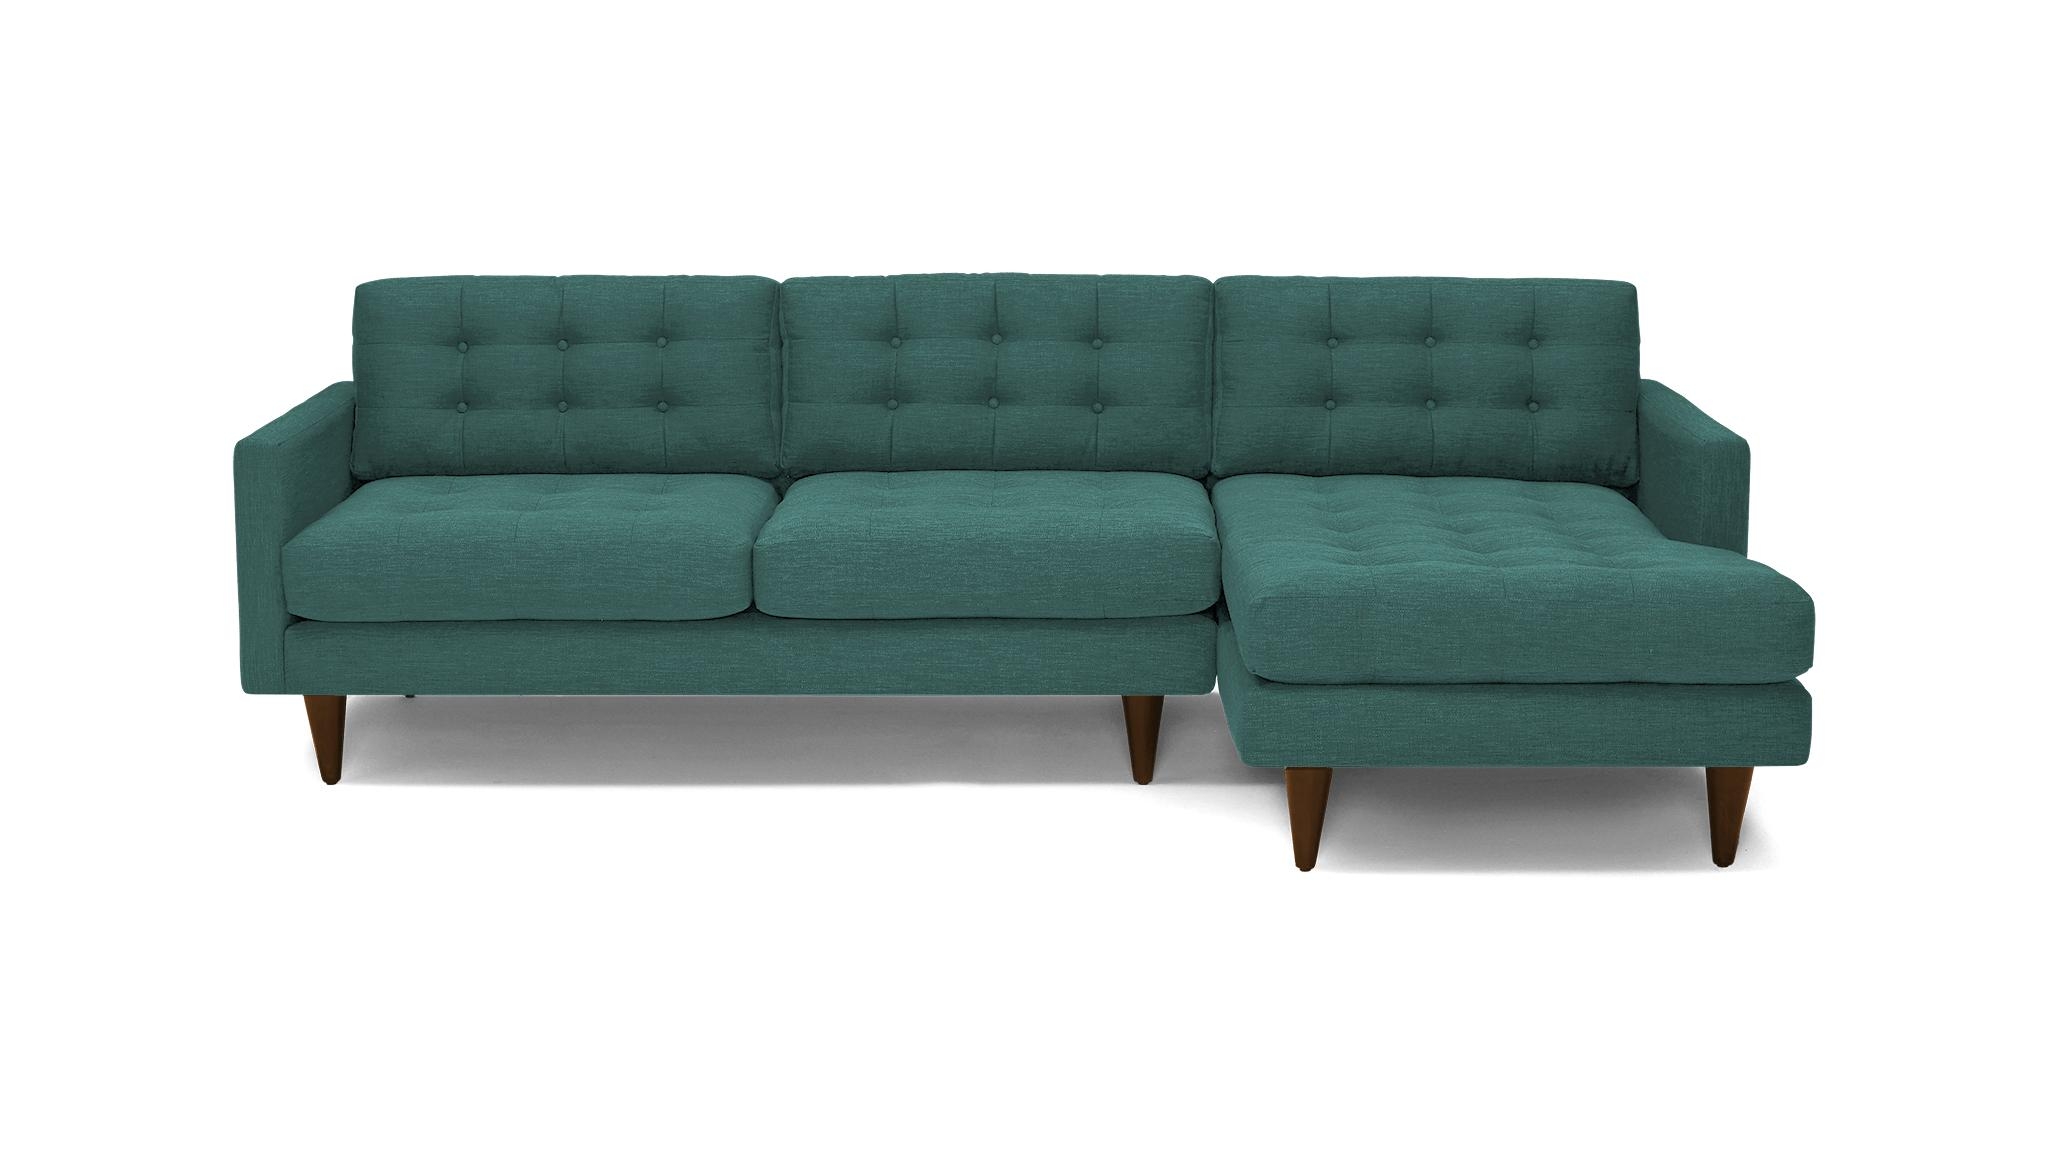 Blue Eliot Mid Century Modern Sectional - Prime Peacock - Mocha - Right - Image 0